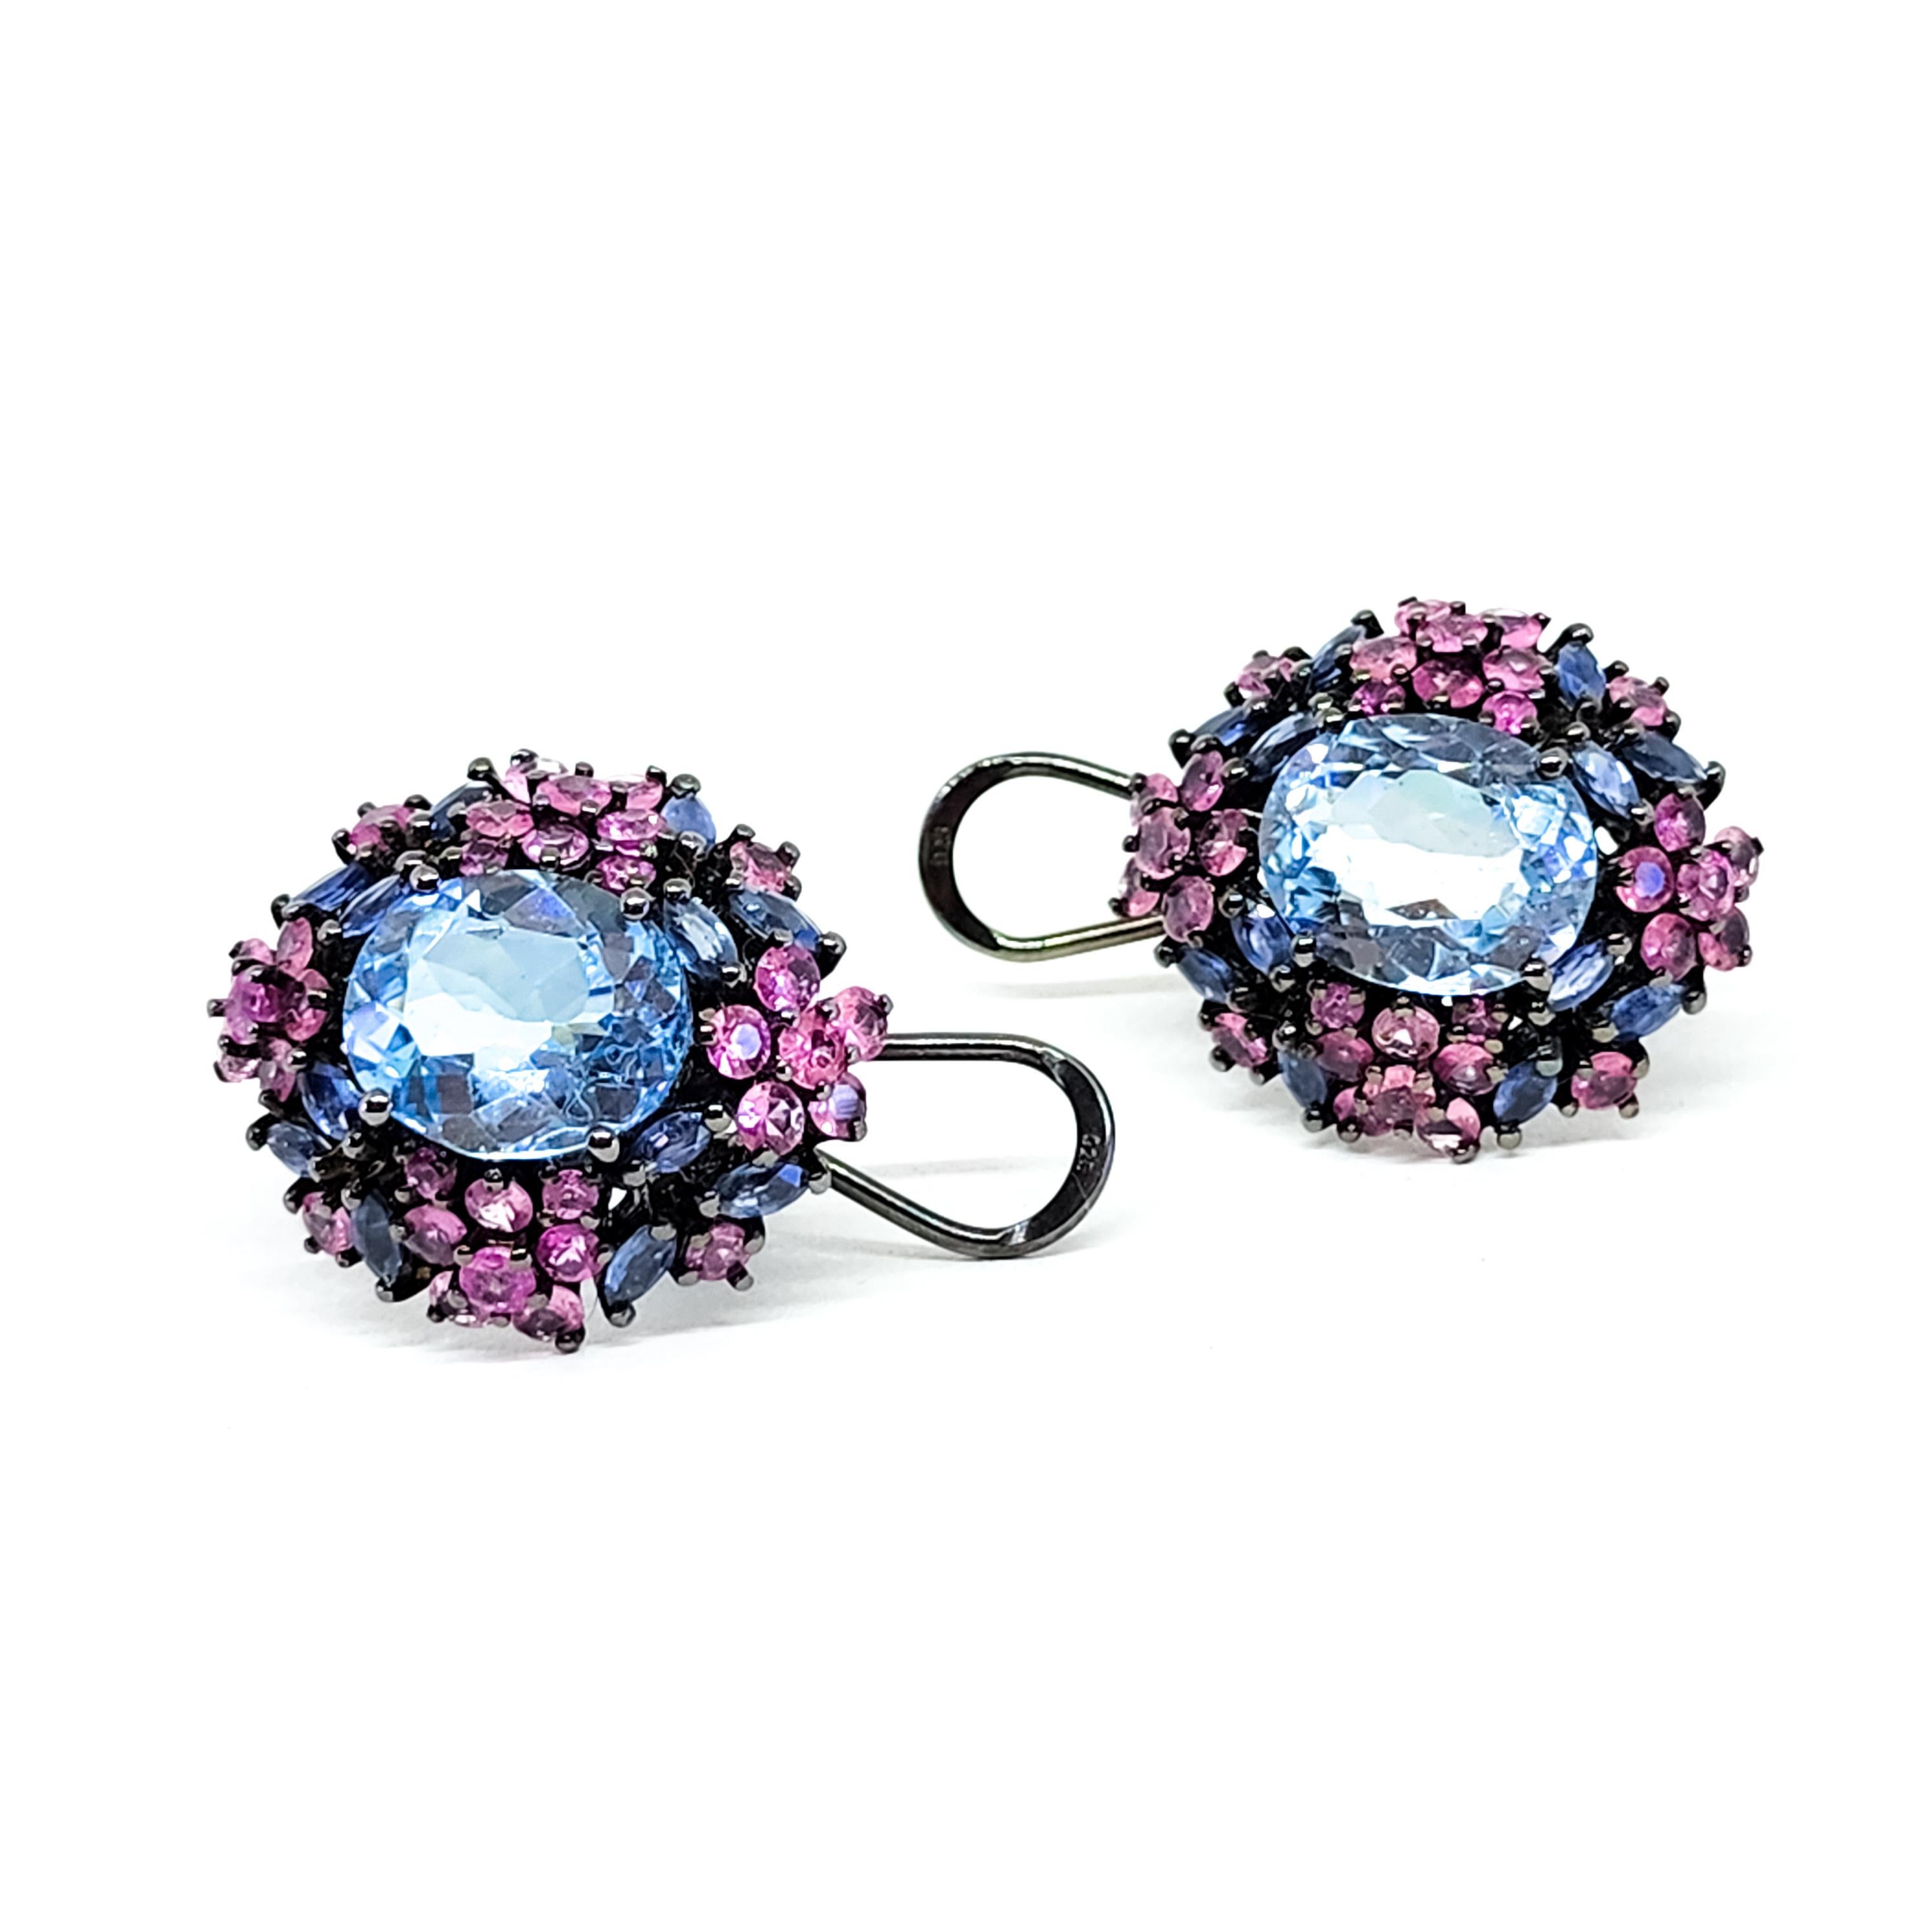 One pair of post and omega back cluster Earrings featuring a Deliciously Sweet Confectionery of Colored Gemstones in Pinks, Blues and Purples. These festive Earrings are an ode to beautiful Spring Flowers and are an appropriate accent for all